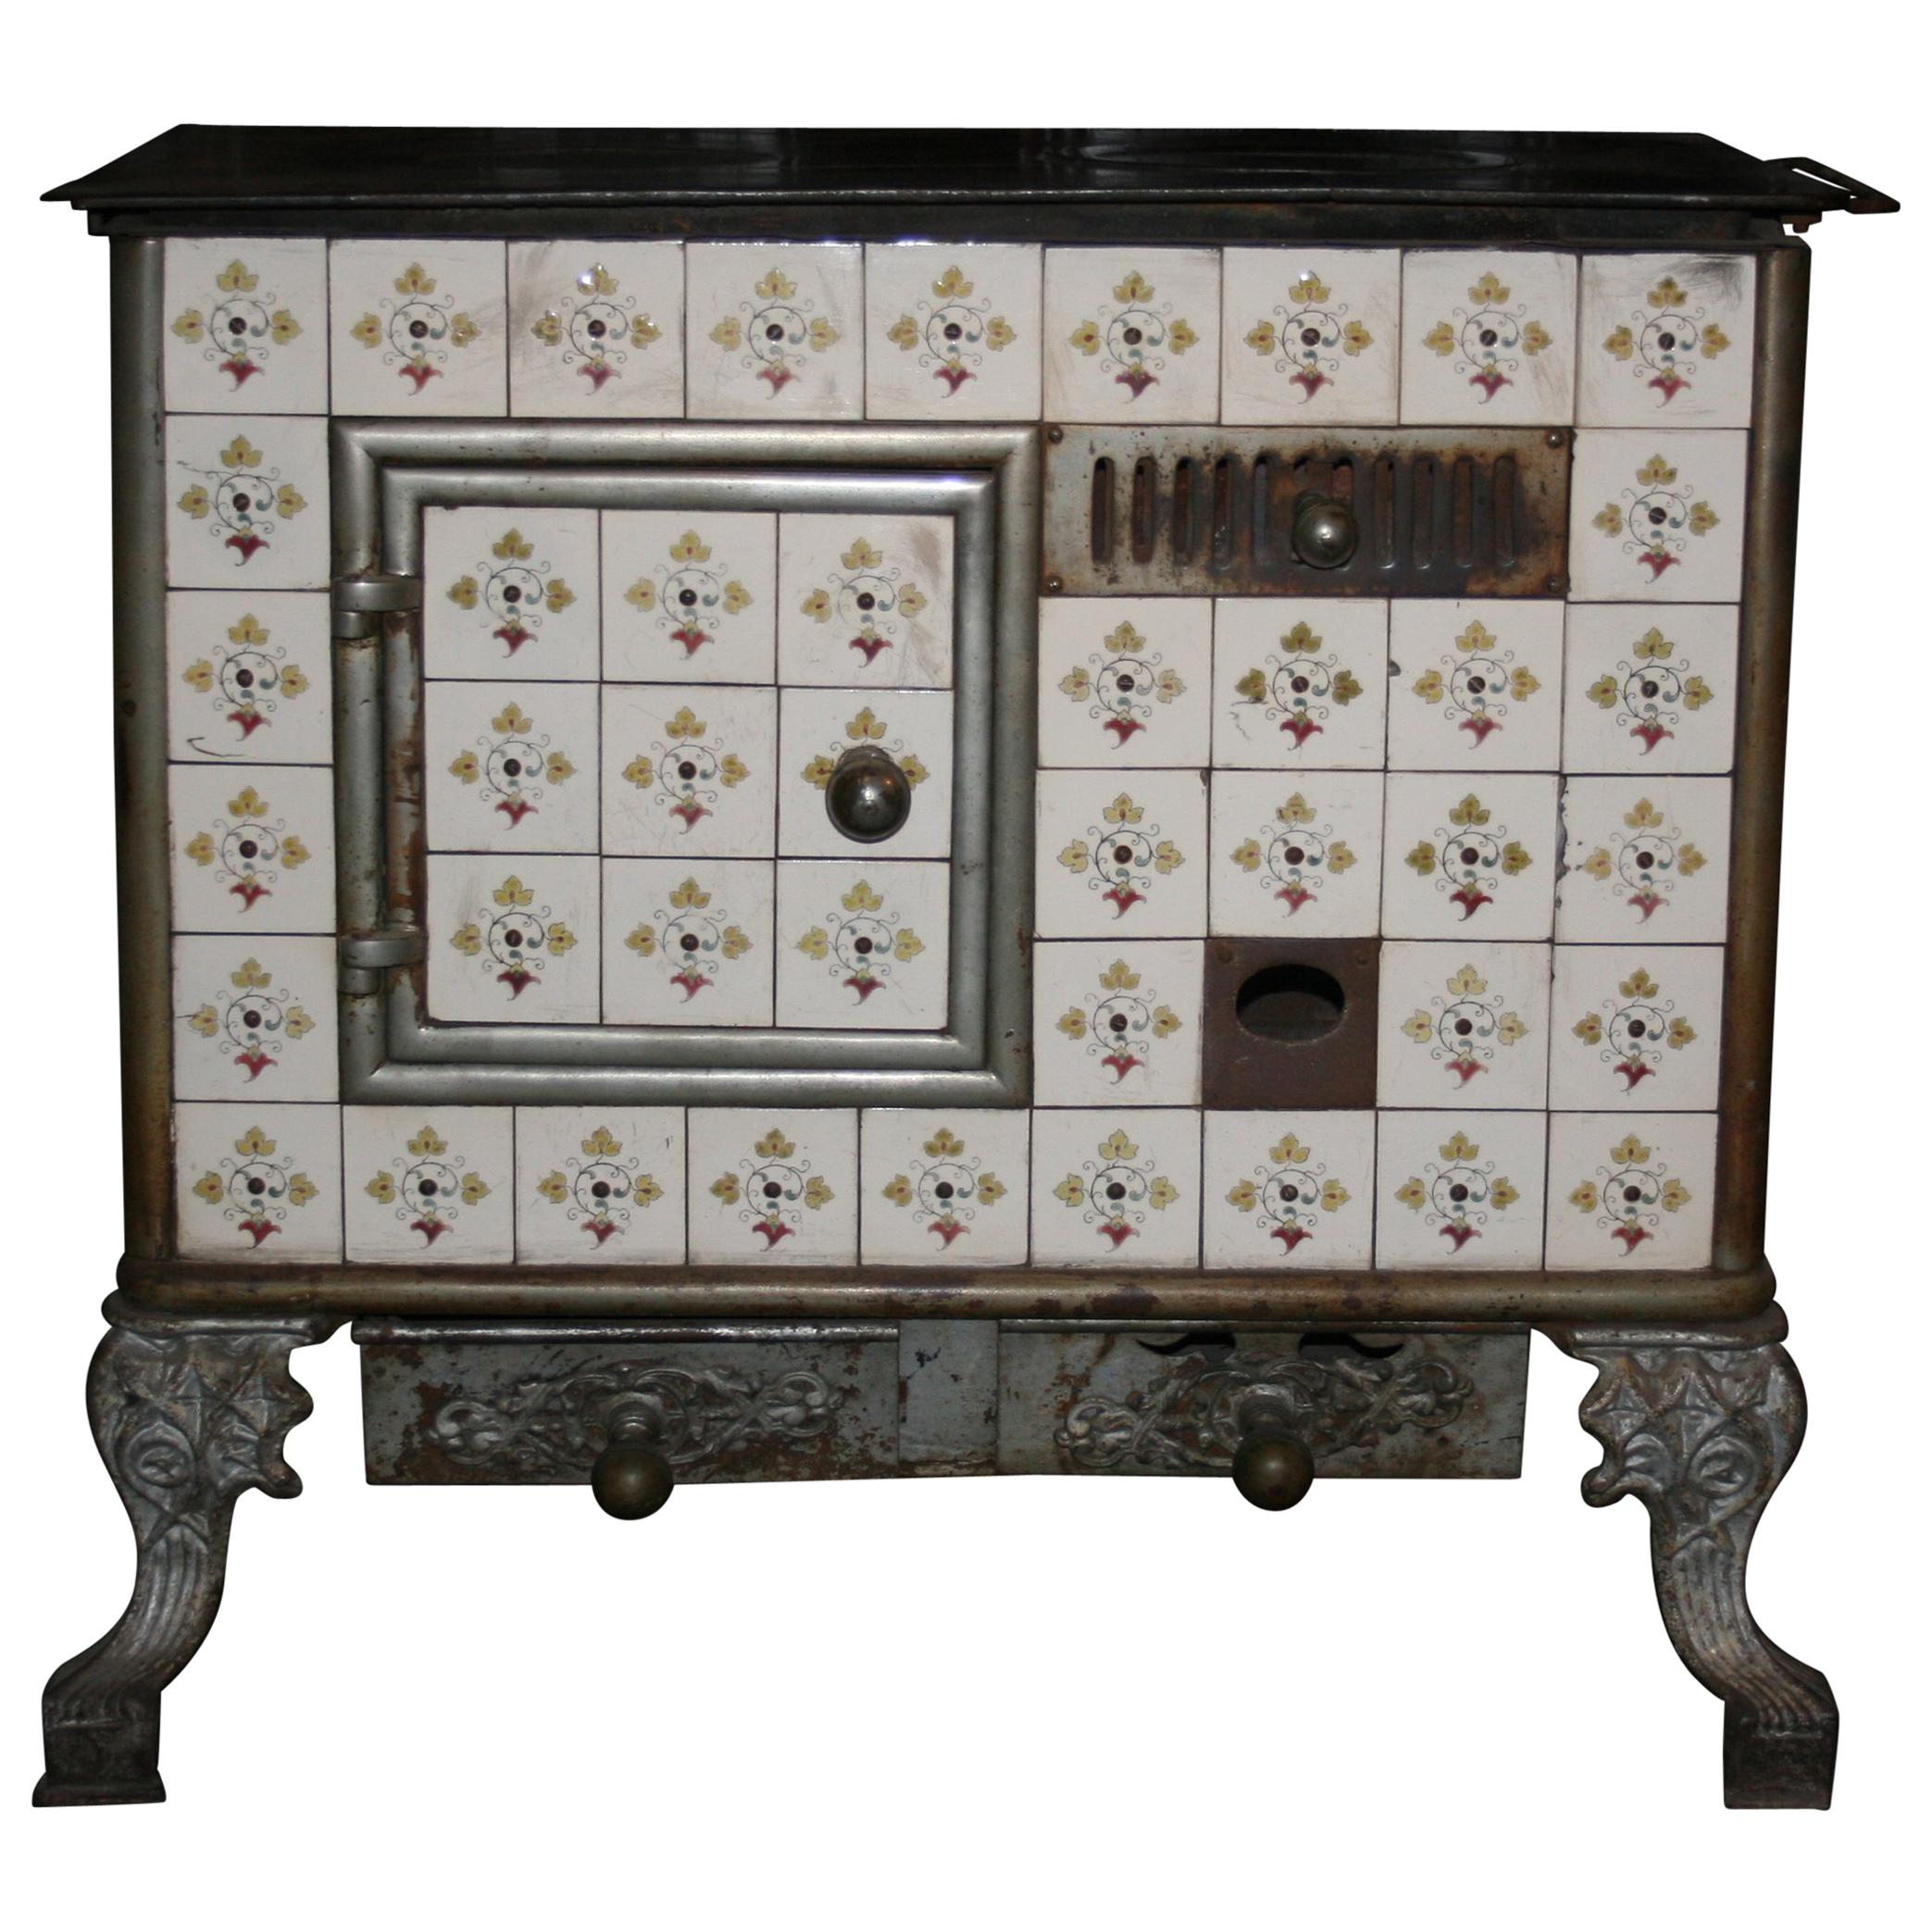 Antique French Tiled Stove, Cast-Iron, circa 1890 For Sale